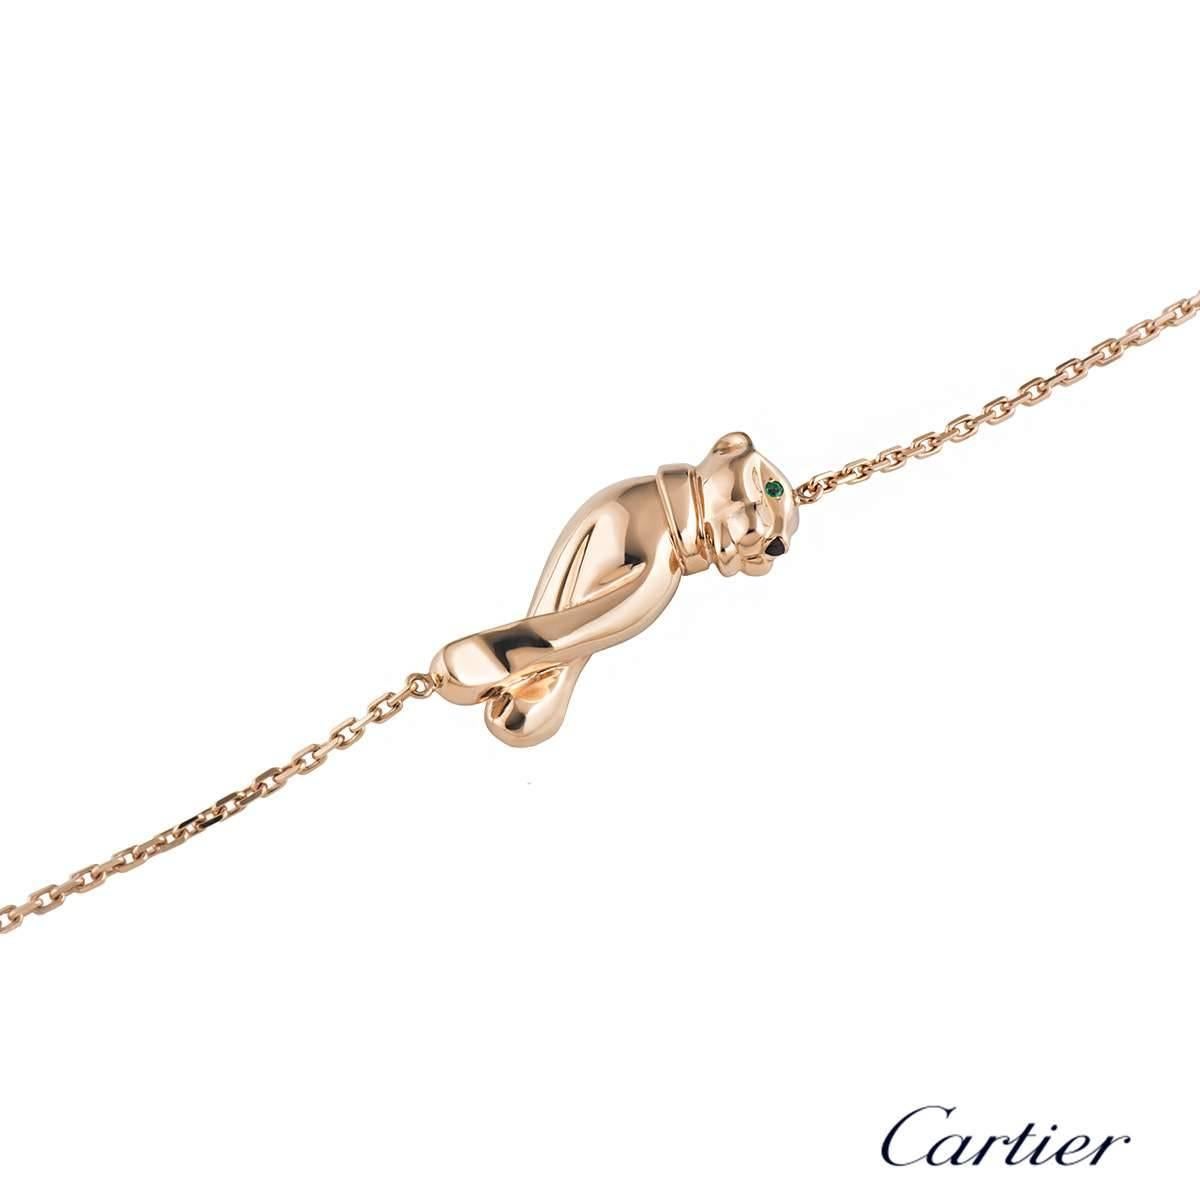 A luxurious 18k rose gold Cartier bracelet from the Panthere de Cartier collection. The bracelet comprises of a panthere motif with tsavorite eyes and a black lacquer nose. The motif has trace link chain featuring a lobster clasp and a loop. The